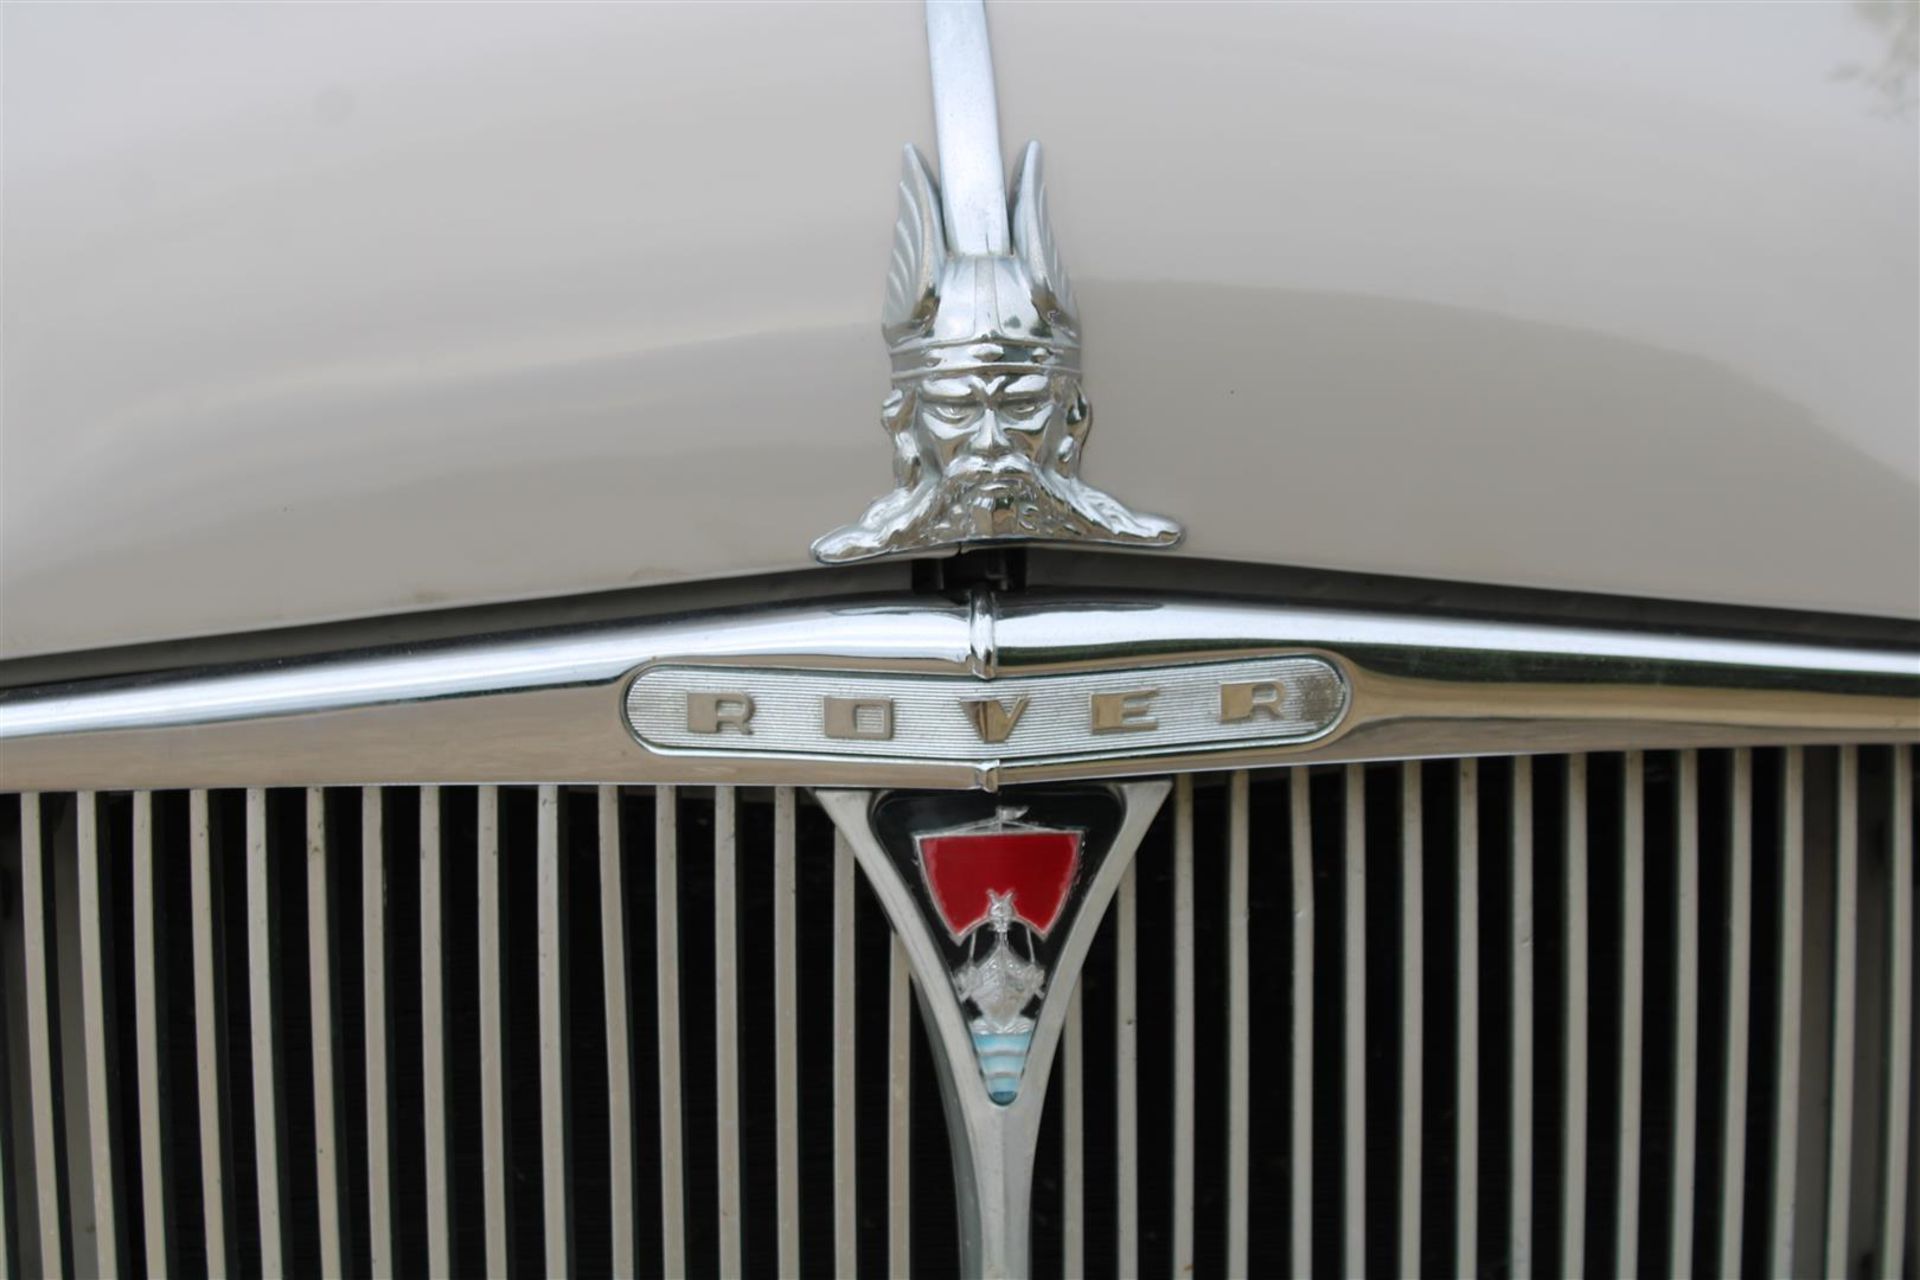 1964 Rover P4 95 Saloon - Image 19 of 23